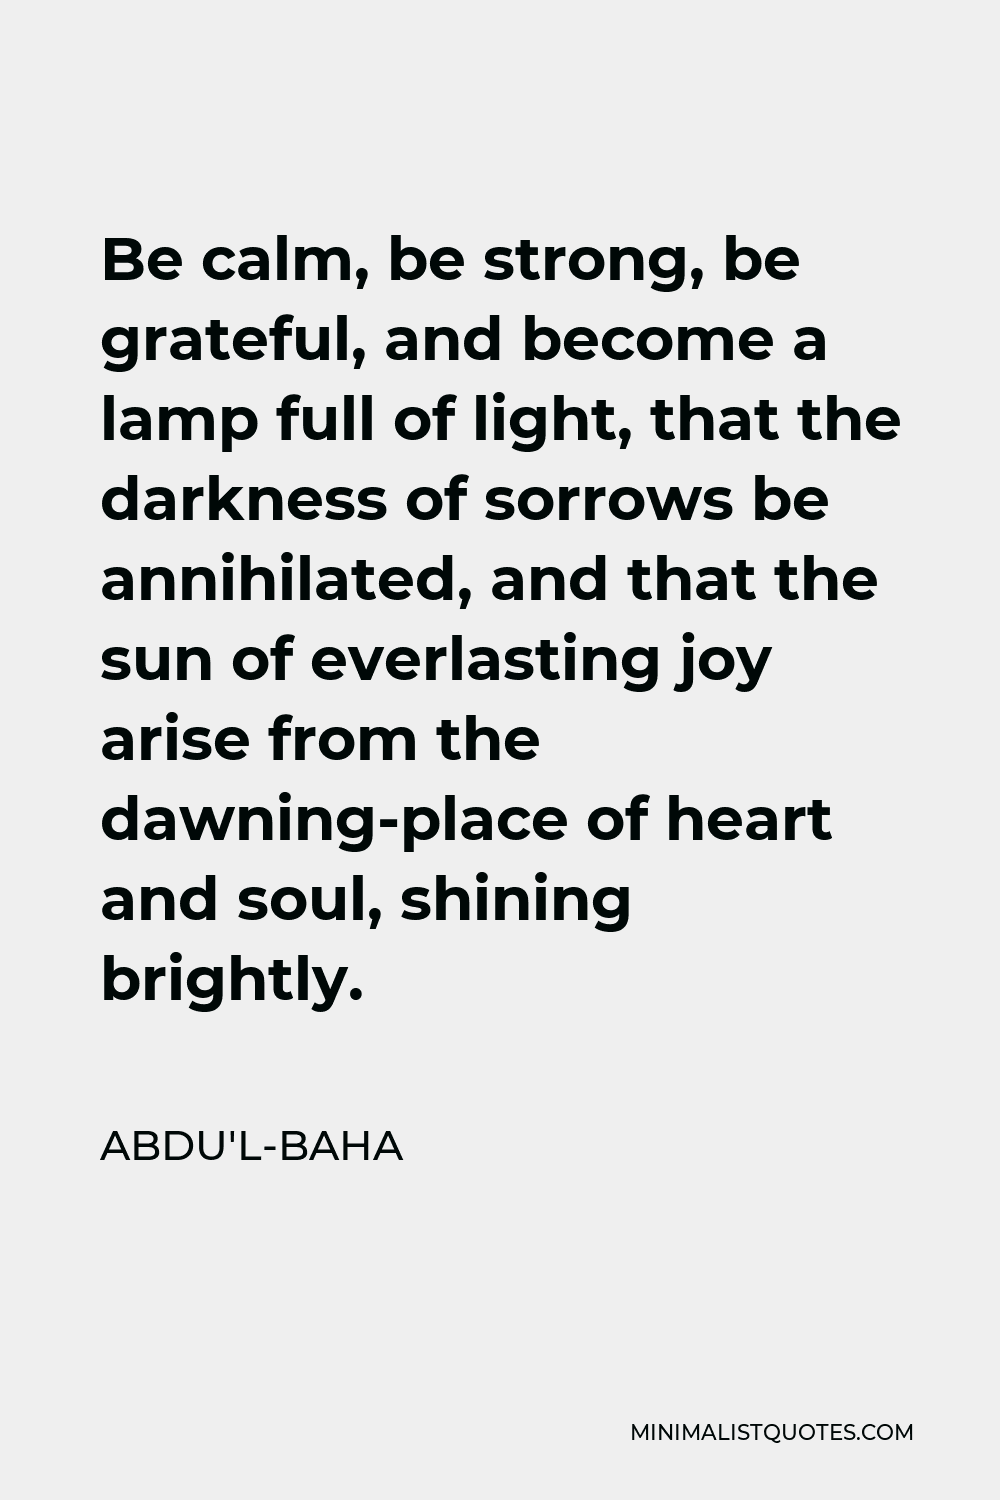 Abdu'l-Baha Quote - Be calm, be strong, be grateful, and become a lamp full of light, that the darkness of sorrows be annihilated, and that the sun of everlasting joy arise from the dawning-place of heart and soul, shining brightly.